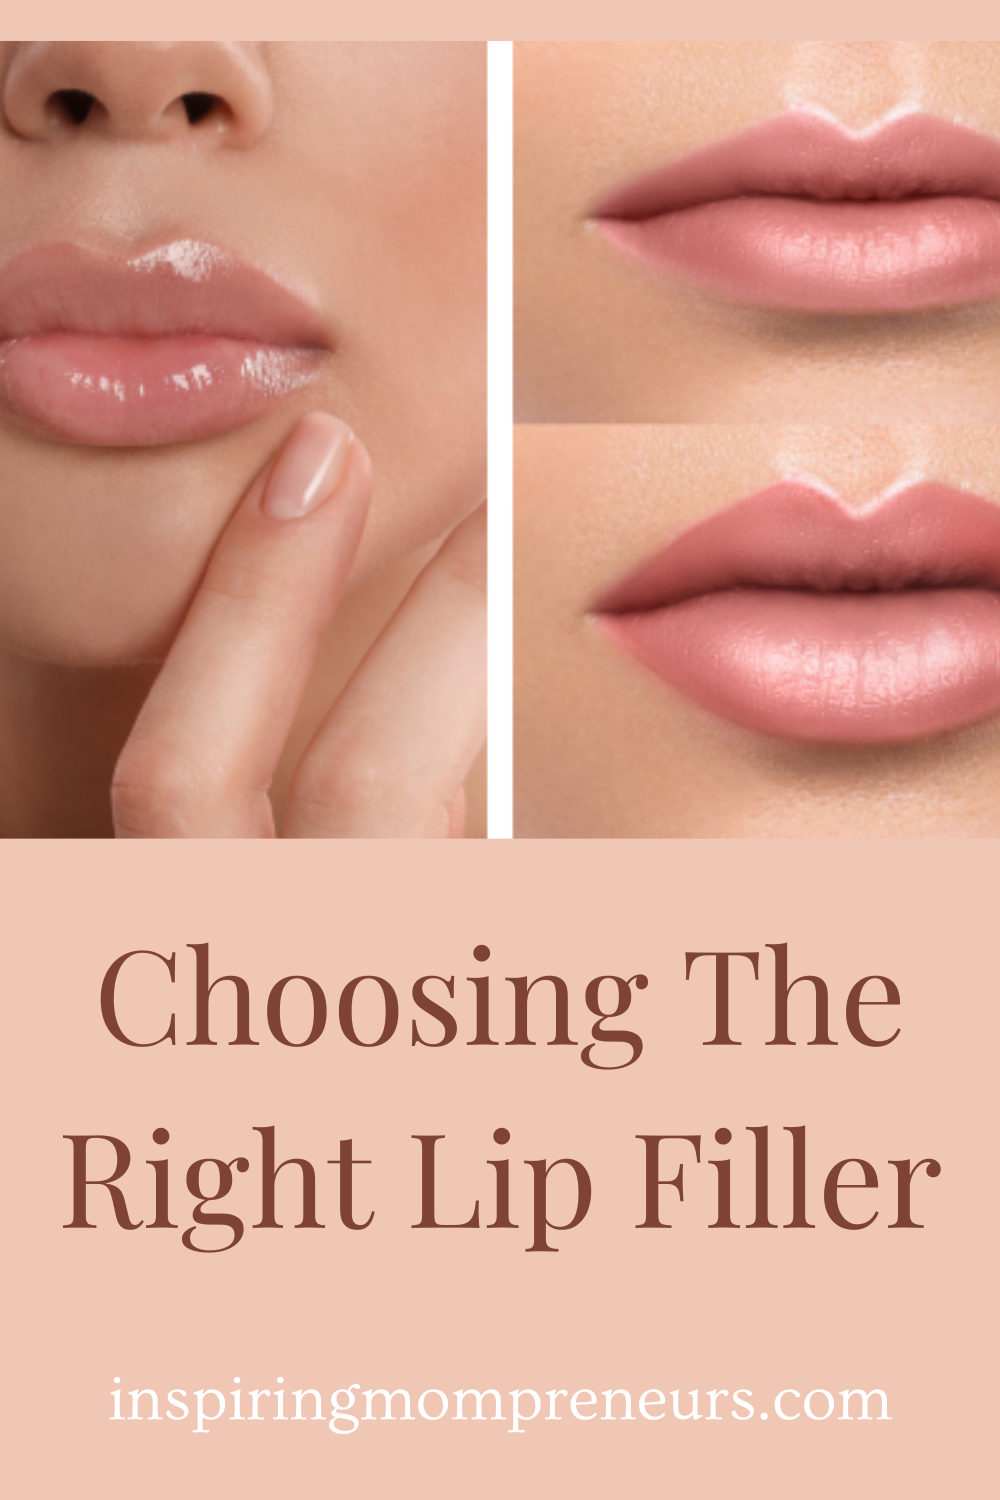 Hey there, beauty enthusiasts! Ever thought about giving your lips a little extra oomph? Here's everything you need to know about choosing the right lip filler.